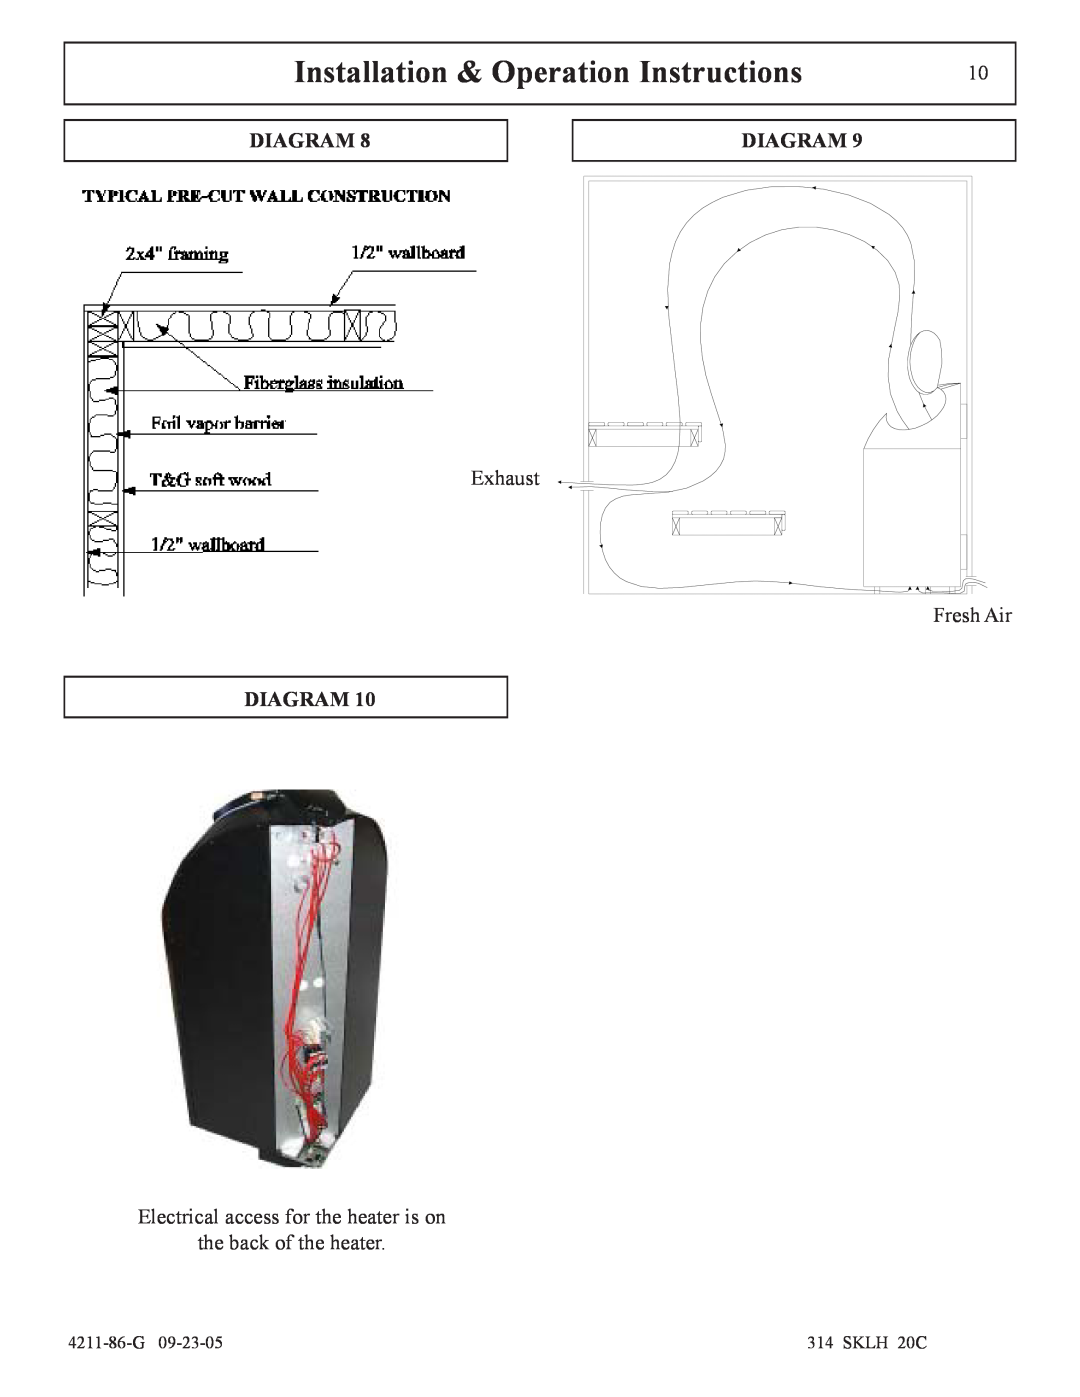 Saunatec 1108-24 Installation & Operation Instructions, Diagram, Exhaust Fresh Air, Electrical access for the heater is on 